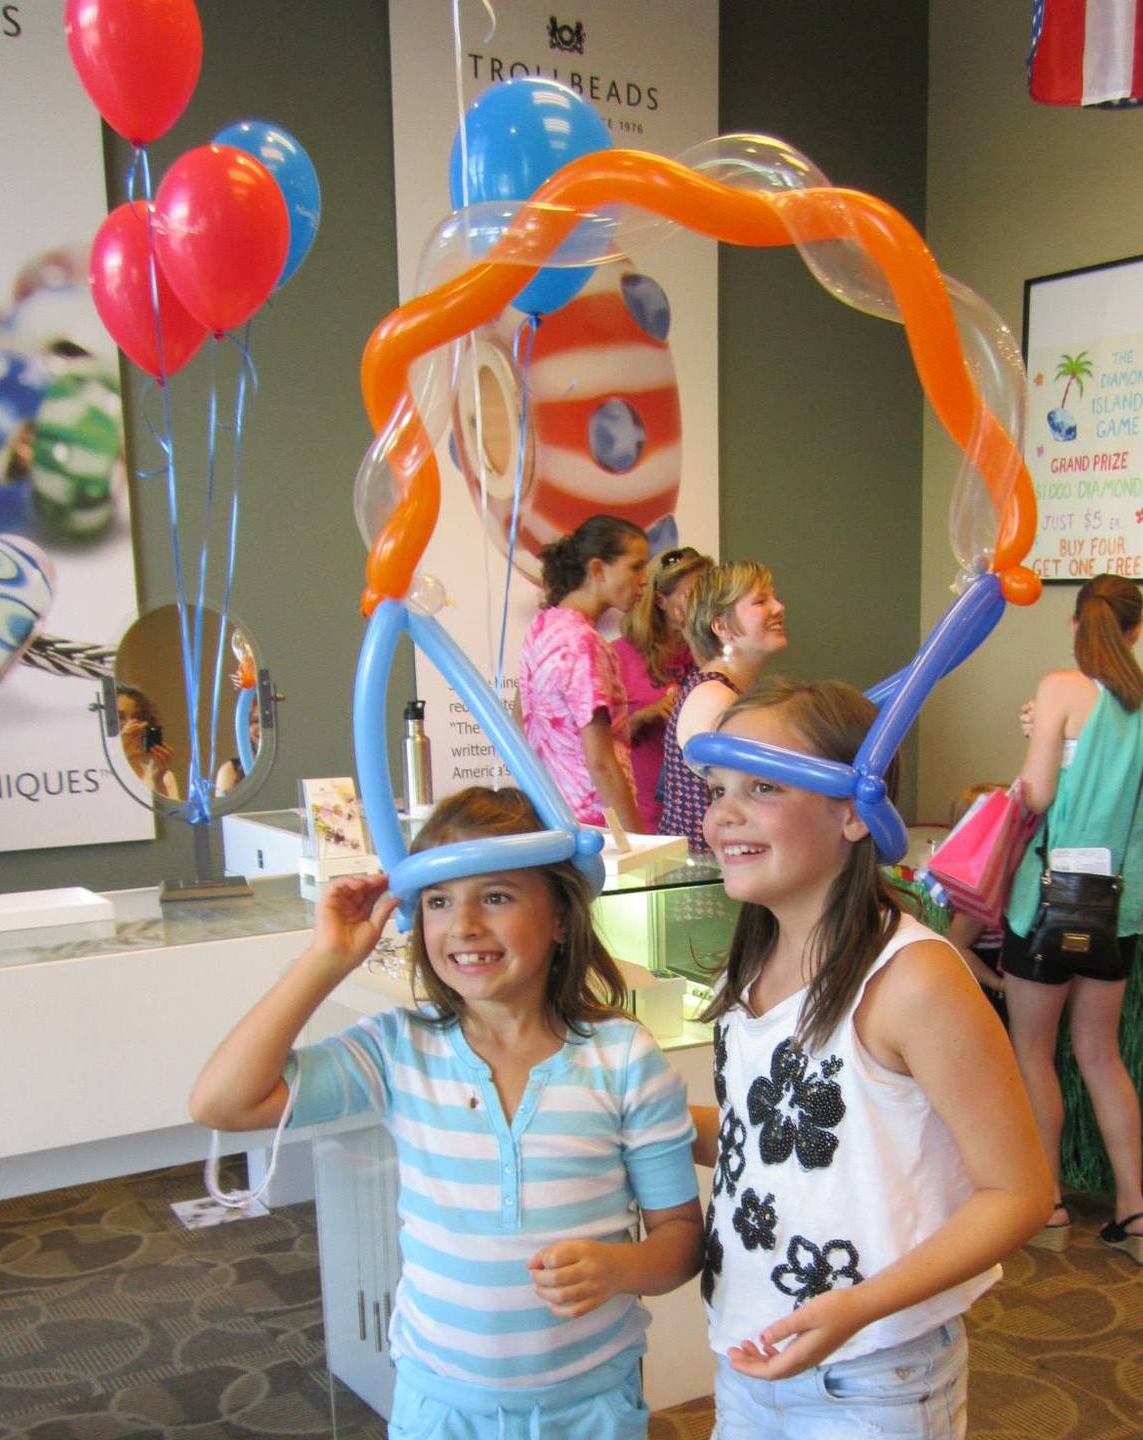 Two person balloon hat